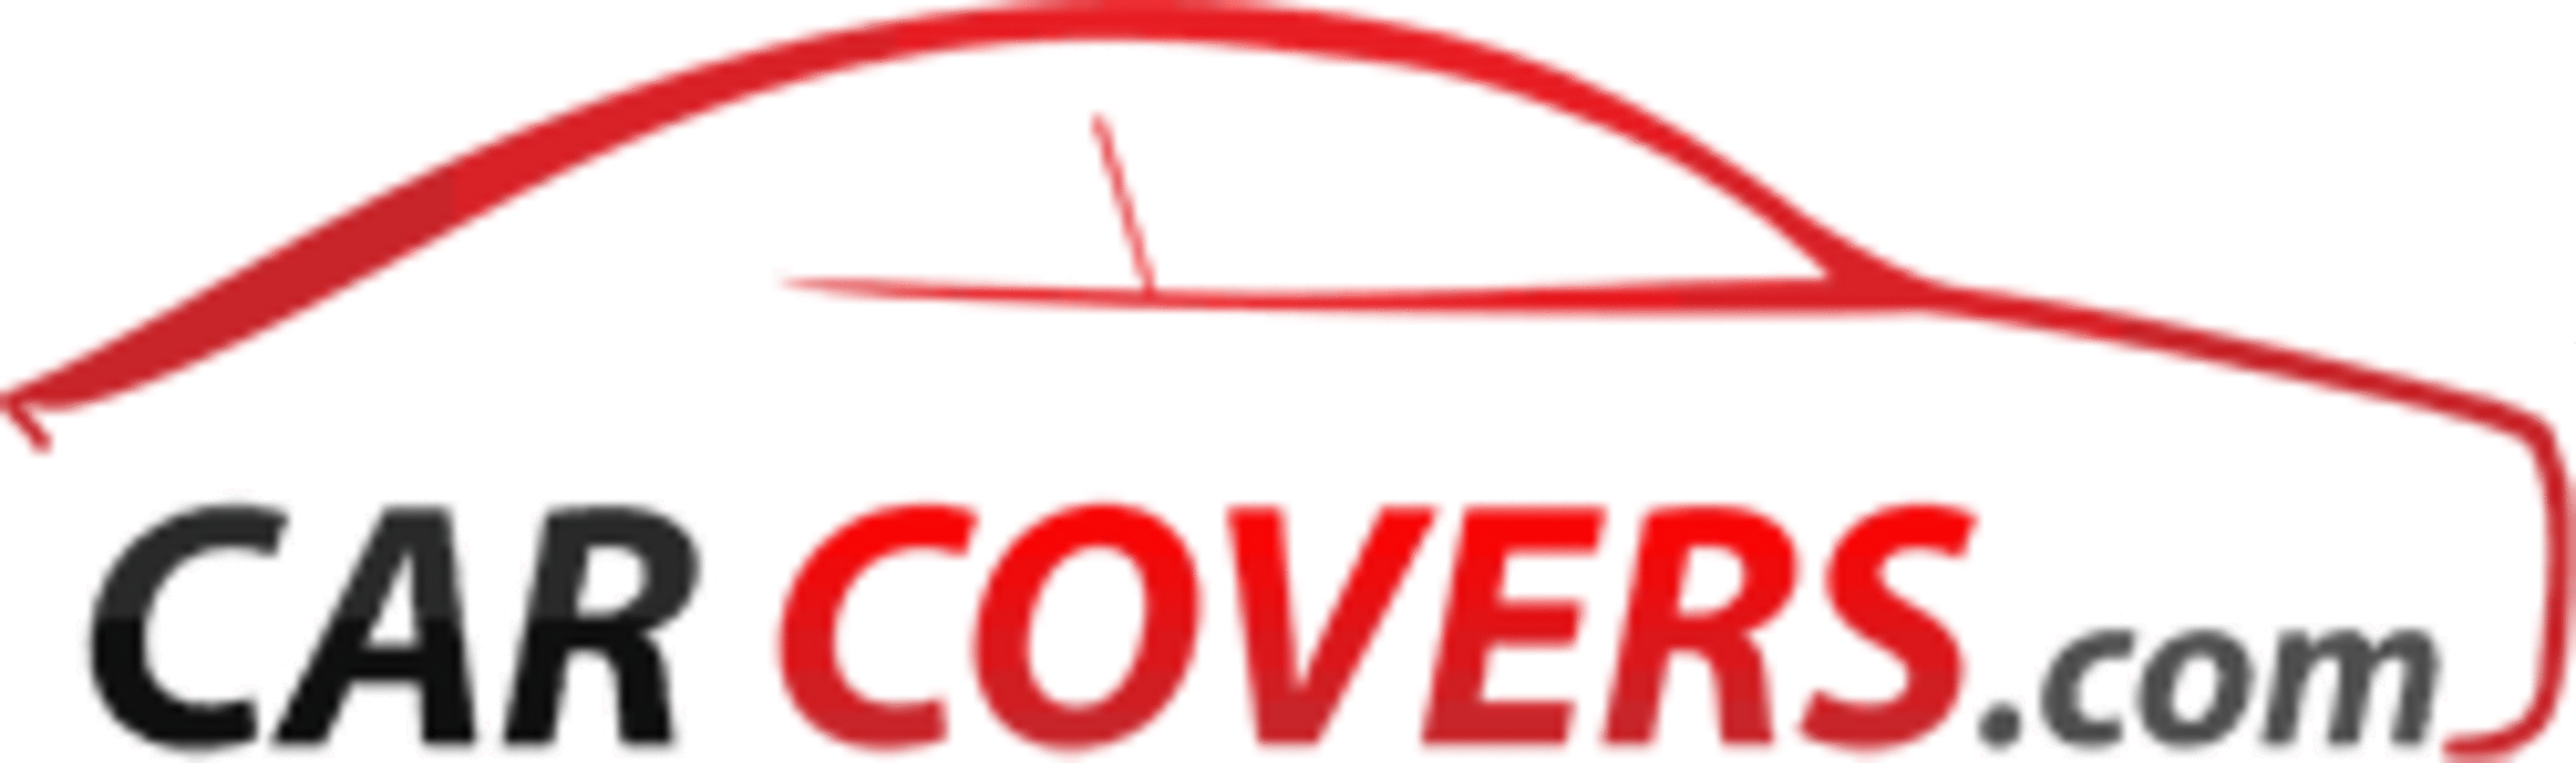 CarCovers.comCode